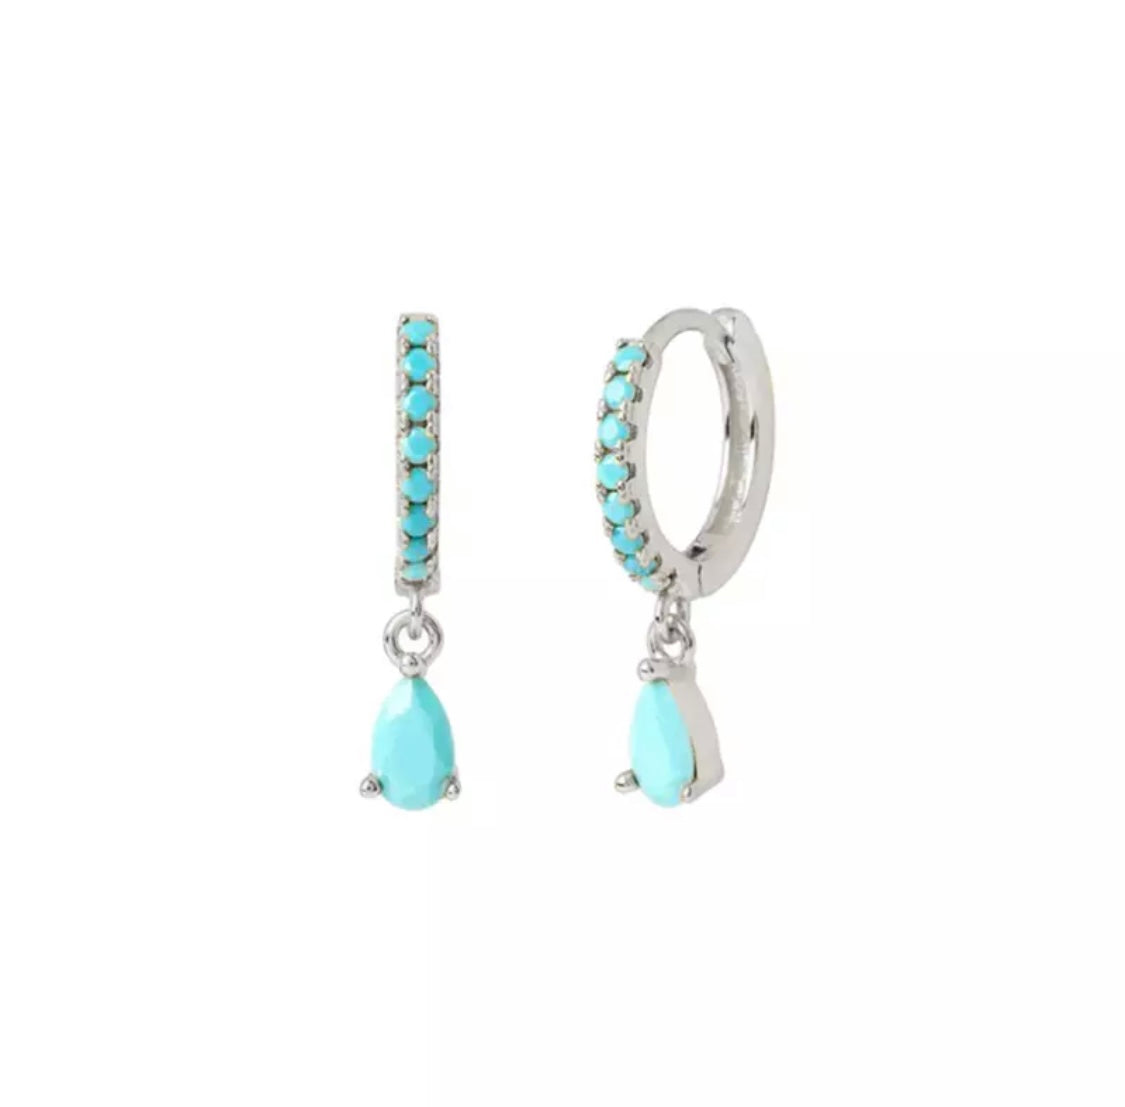 Cute Silver Turquoise Hoops